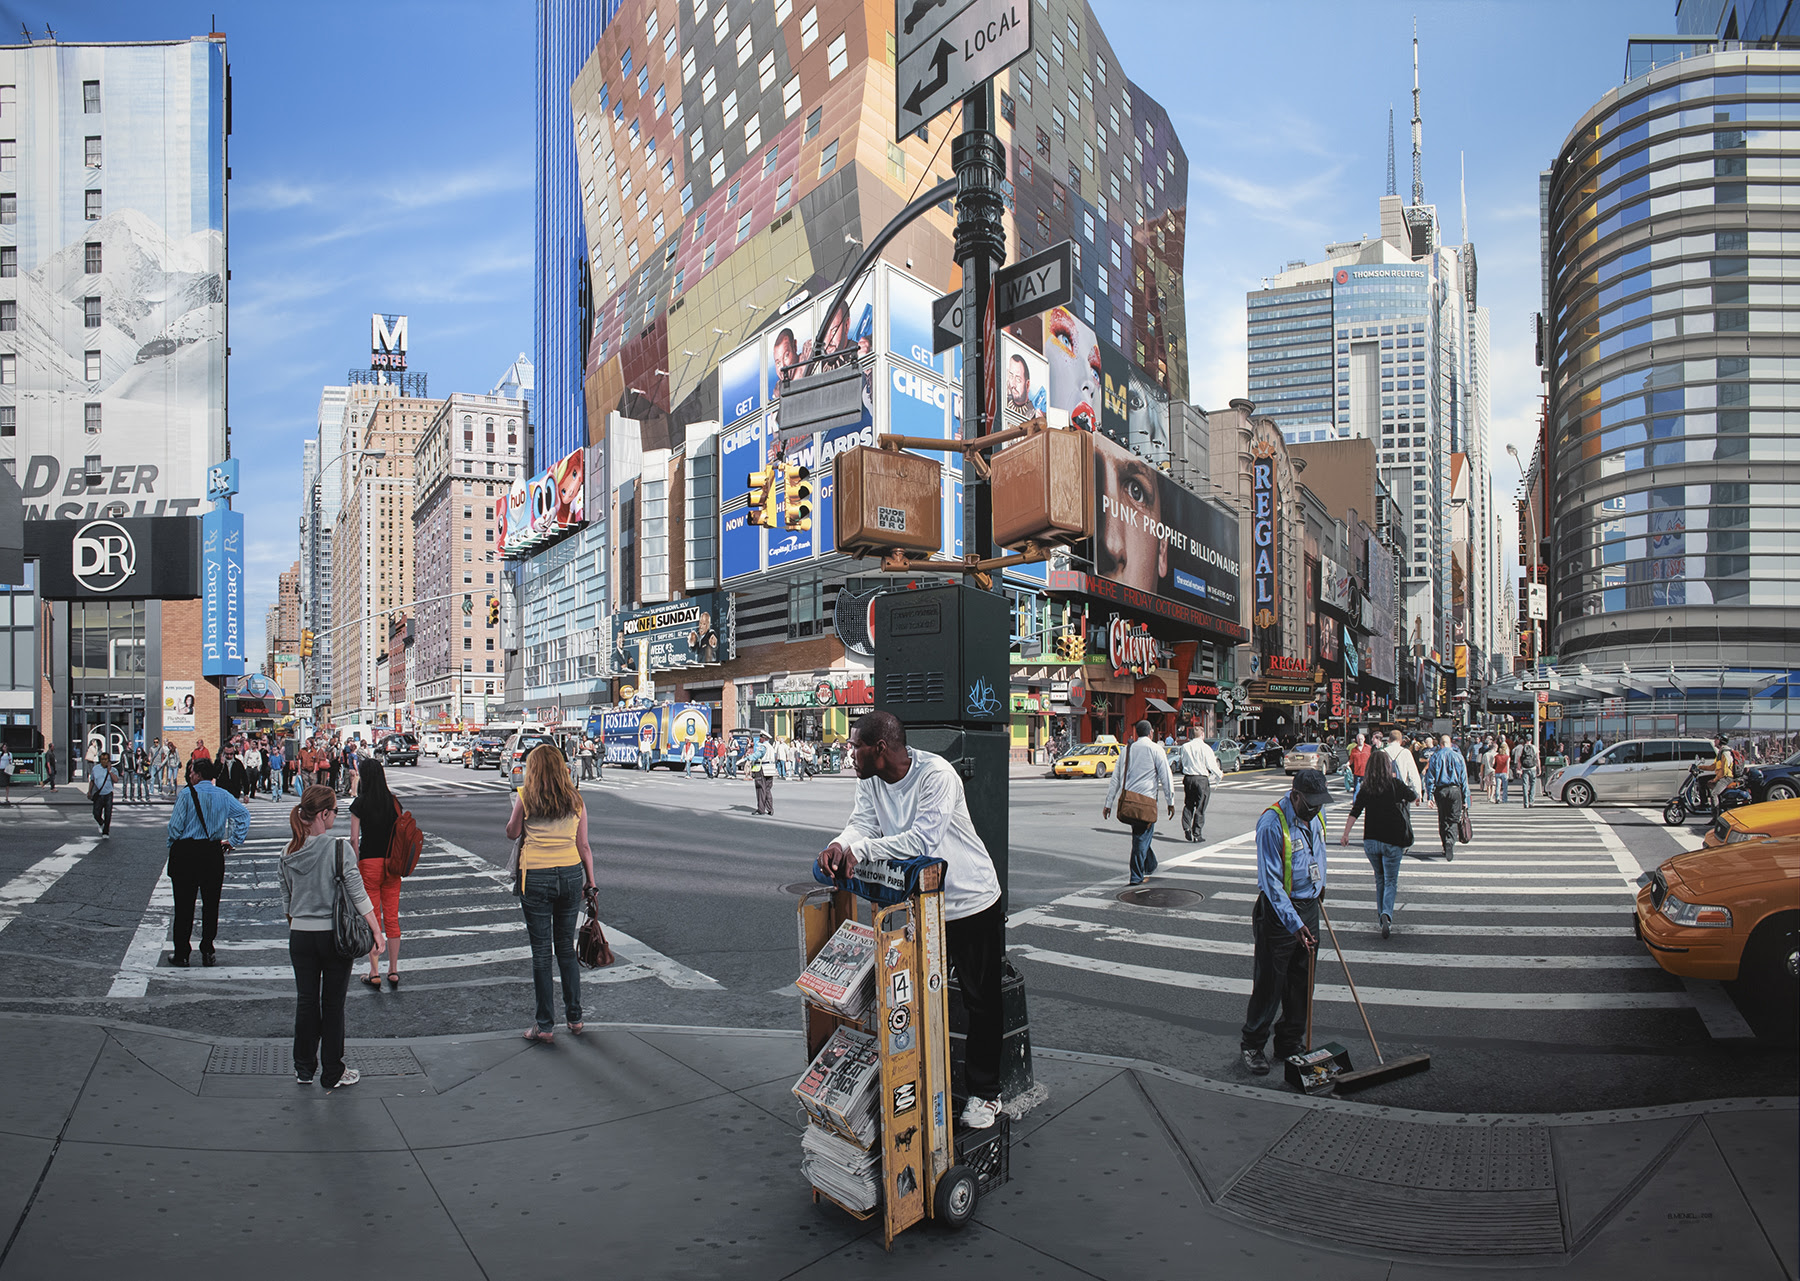 Beyond the Lens: Photorealist Perspectives on Looking, Seeing, and Painting